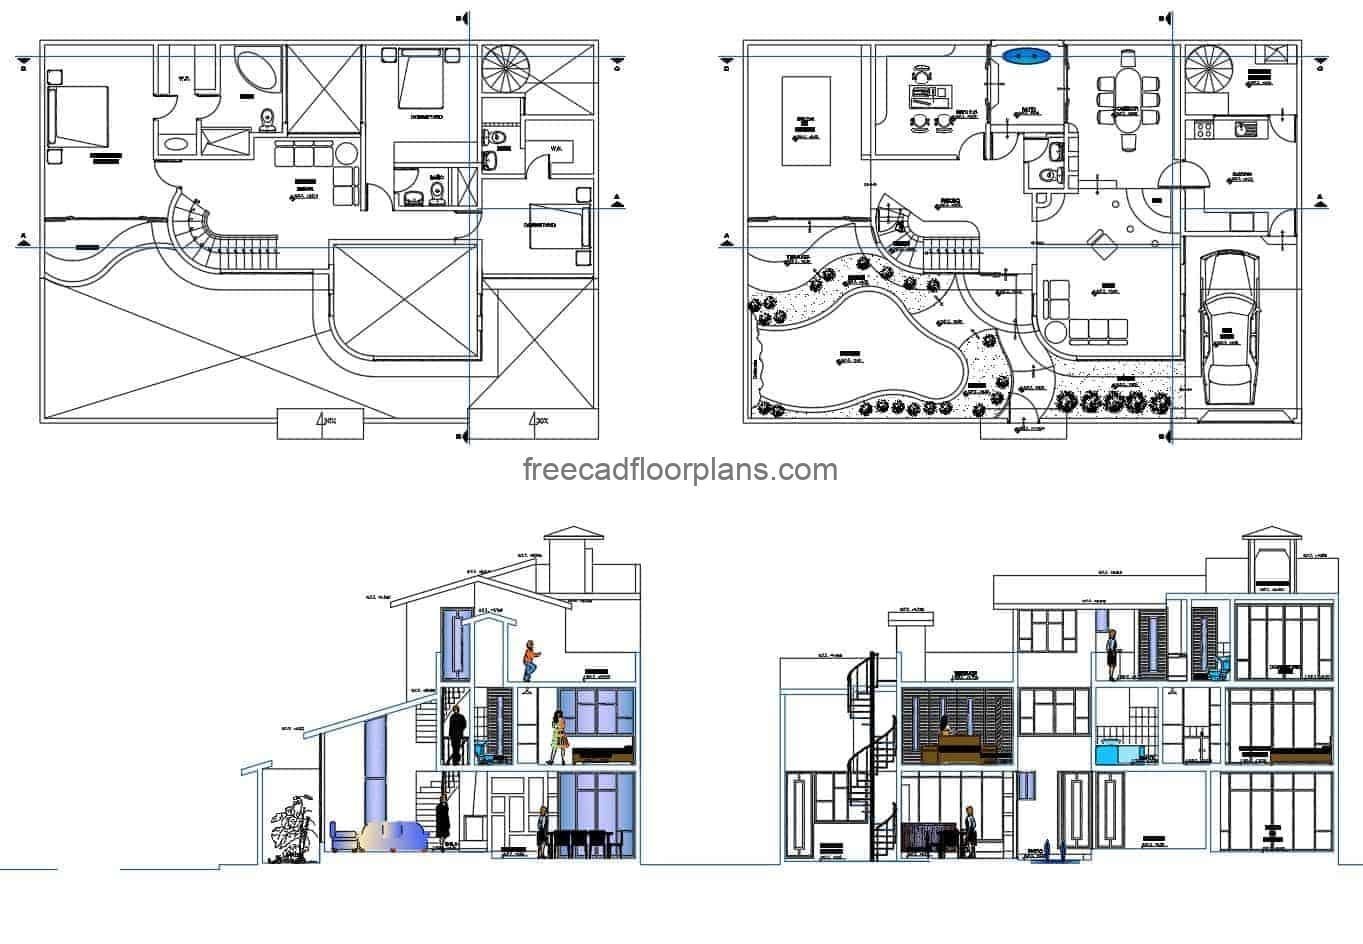 Architectural project in DWG format of a modern three-storey residence, architectural floor plan for space distribution, detail plan with sections and interior elevations, blocks in DWG for free download